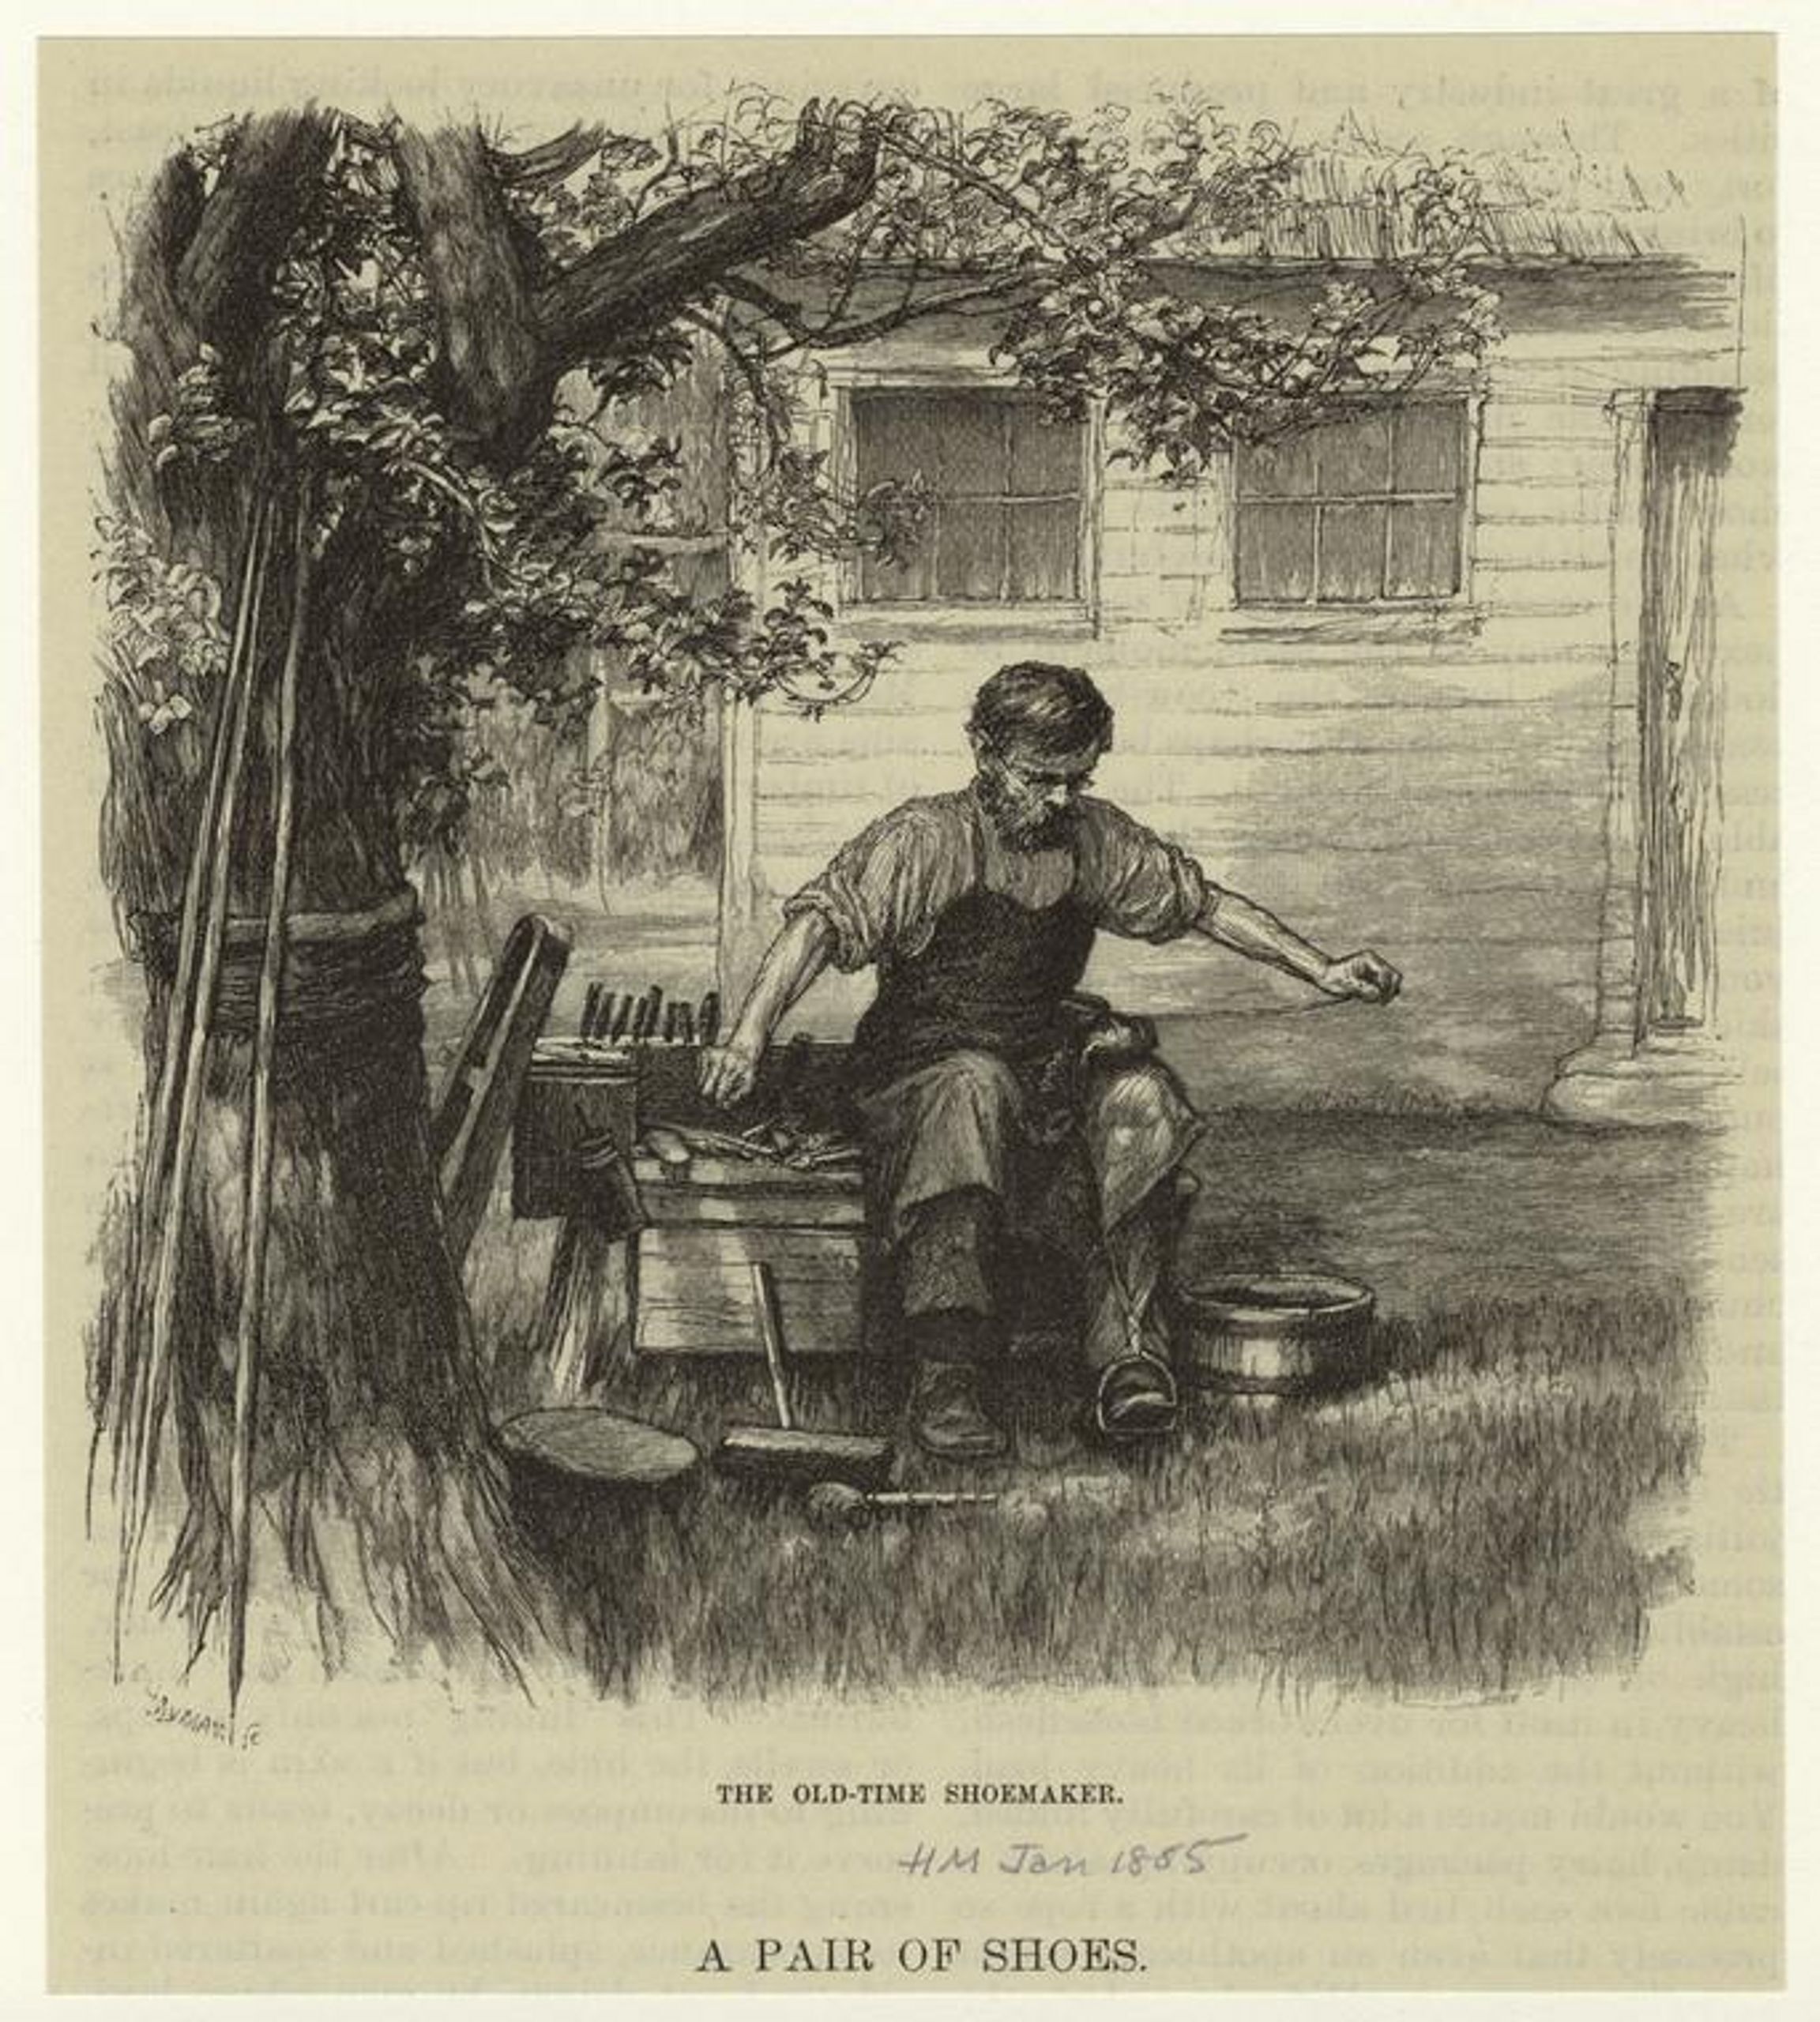 Drawing of a shoemaker at work in front of a house next to a tree.